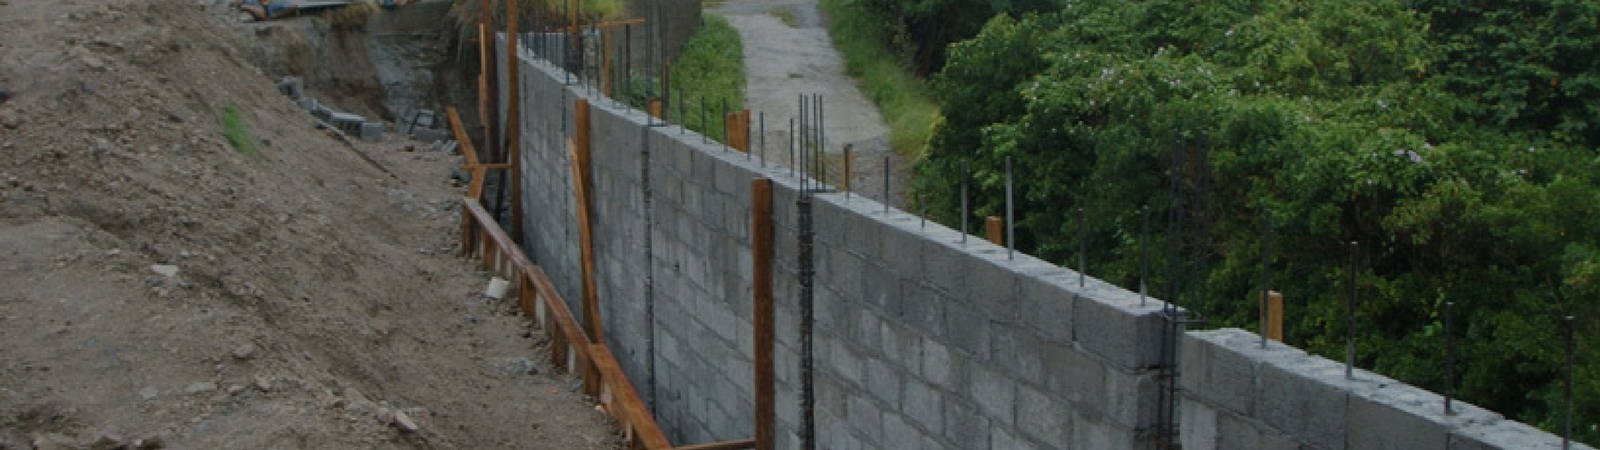 Grand Bay Youth Centre Retaining Wall